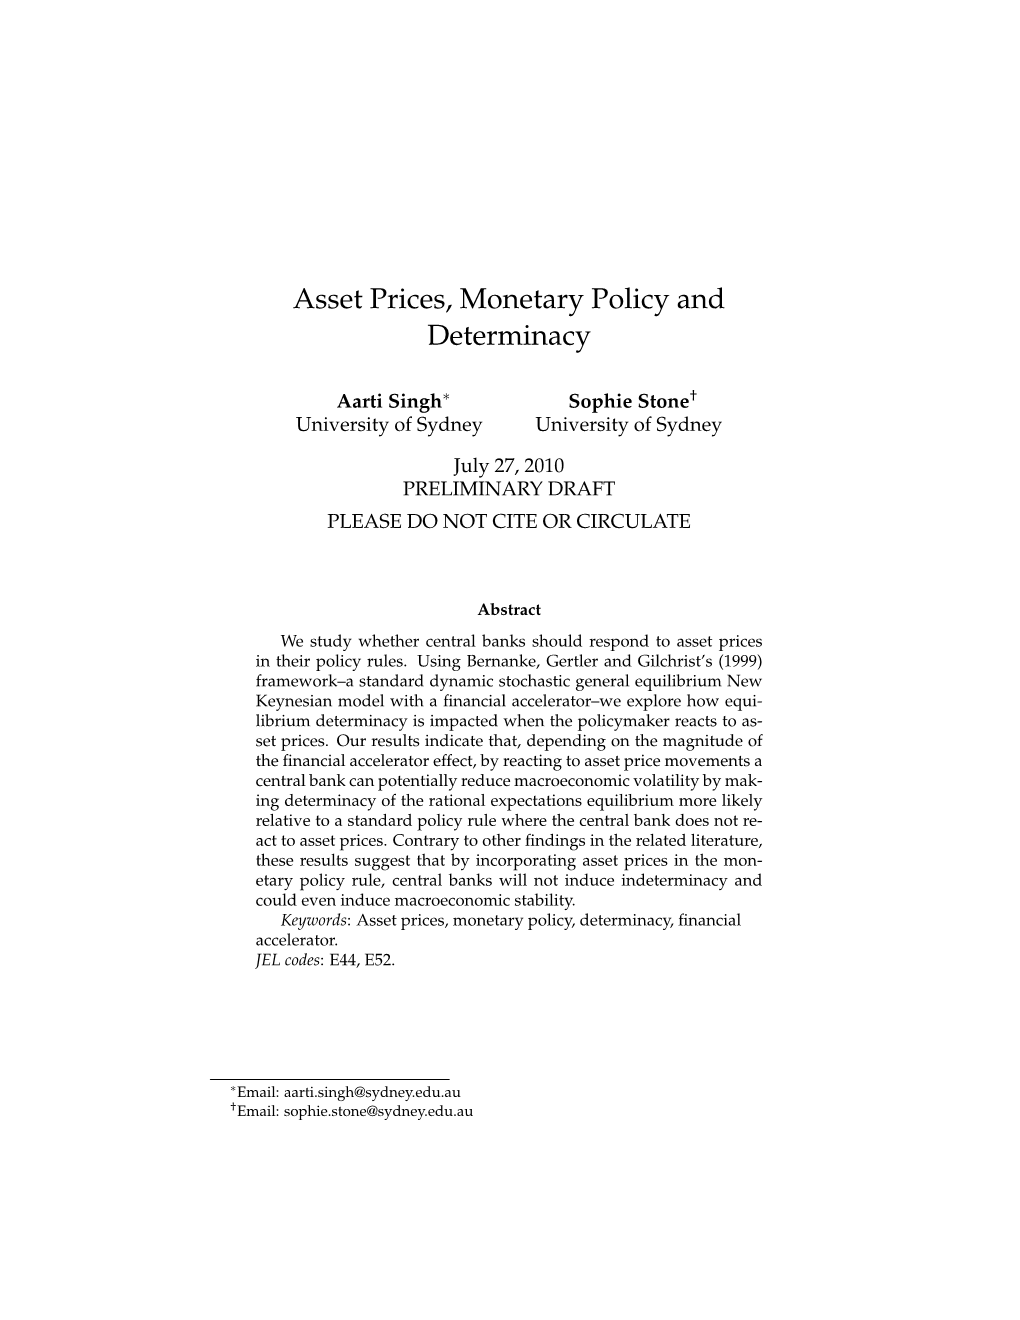 Asset Prices, Monetary Policy and Determinacy